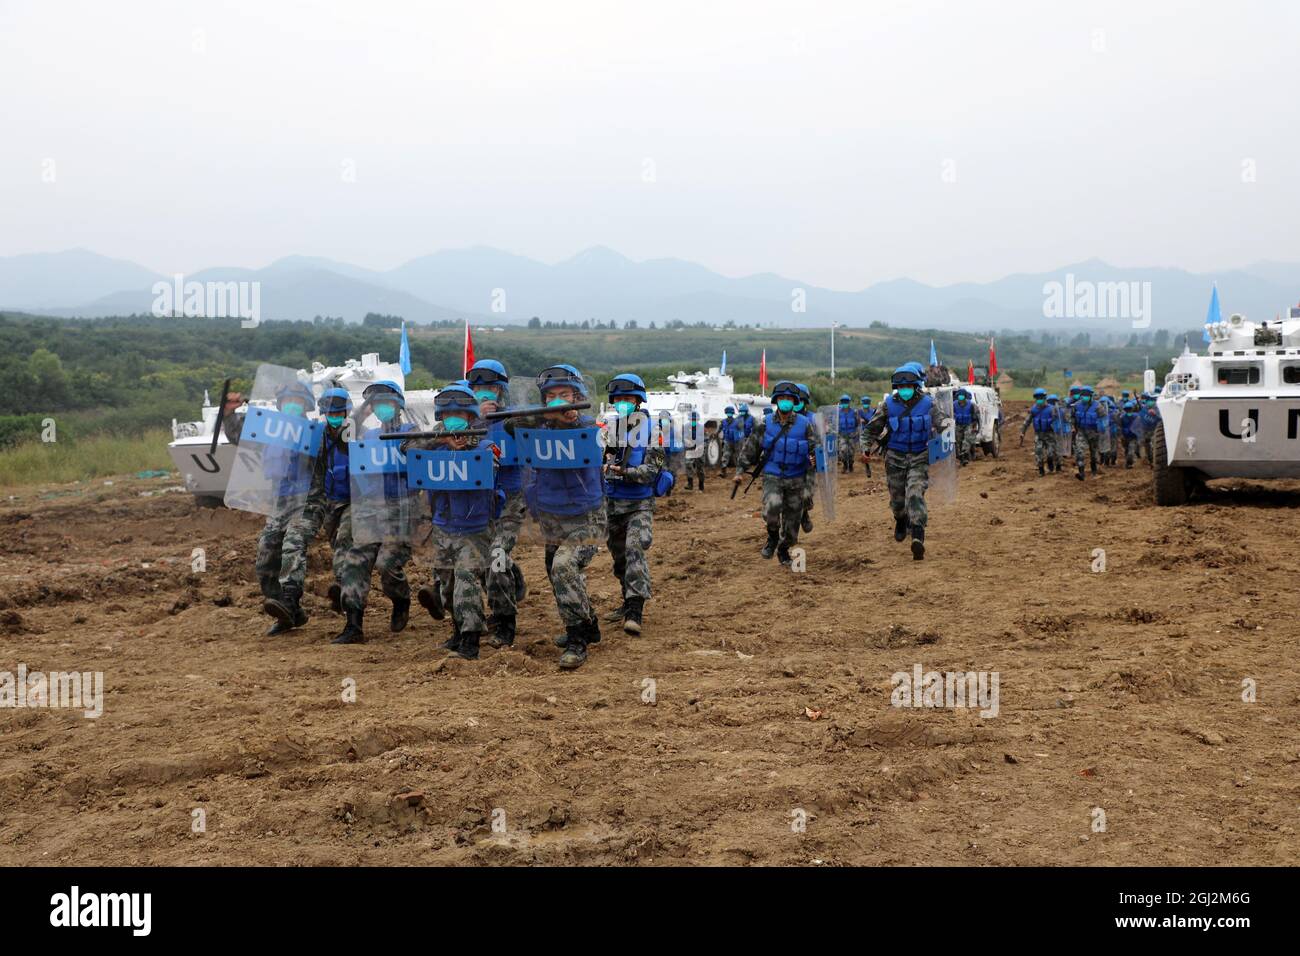 (210908) -- ZHENGZHOU, Sept. 8, 2021 (Xinhua) -- Peacekeepers participate in an international peacekeeping drill at a combined-arms tactical training base of the Chinese People's Liberation Army (PLA) in central China's Henan Province, Sept. 7, 2021. China started holding an international peacekeeping drill code-named 'Shared Destiny-2021' on Sept. 6. Drills of battlefield reconnaissance, security guarding and patrol, armed escort, protection of civilians, response to violent and terrorist attacks, construction of temporary operation base, battlefield first aid, and pandemic control are expe Stock Photo